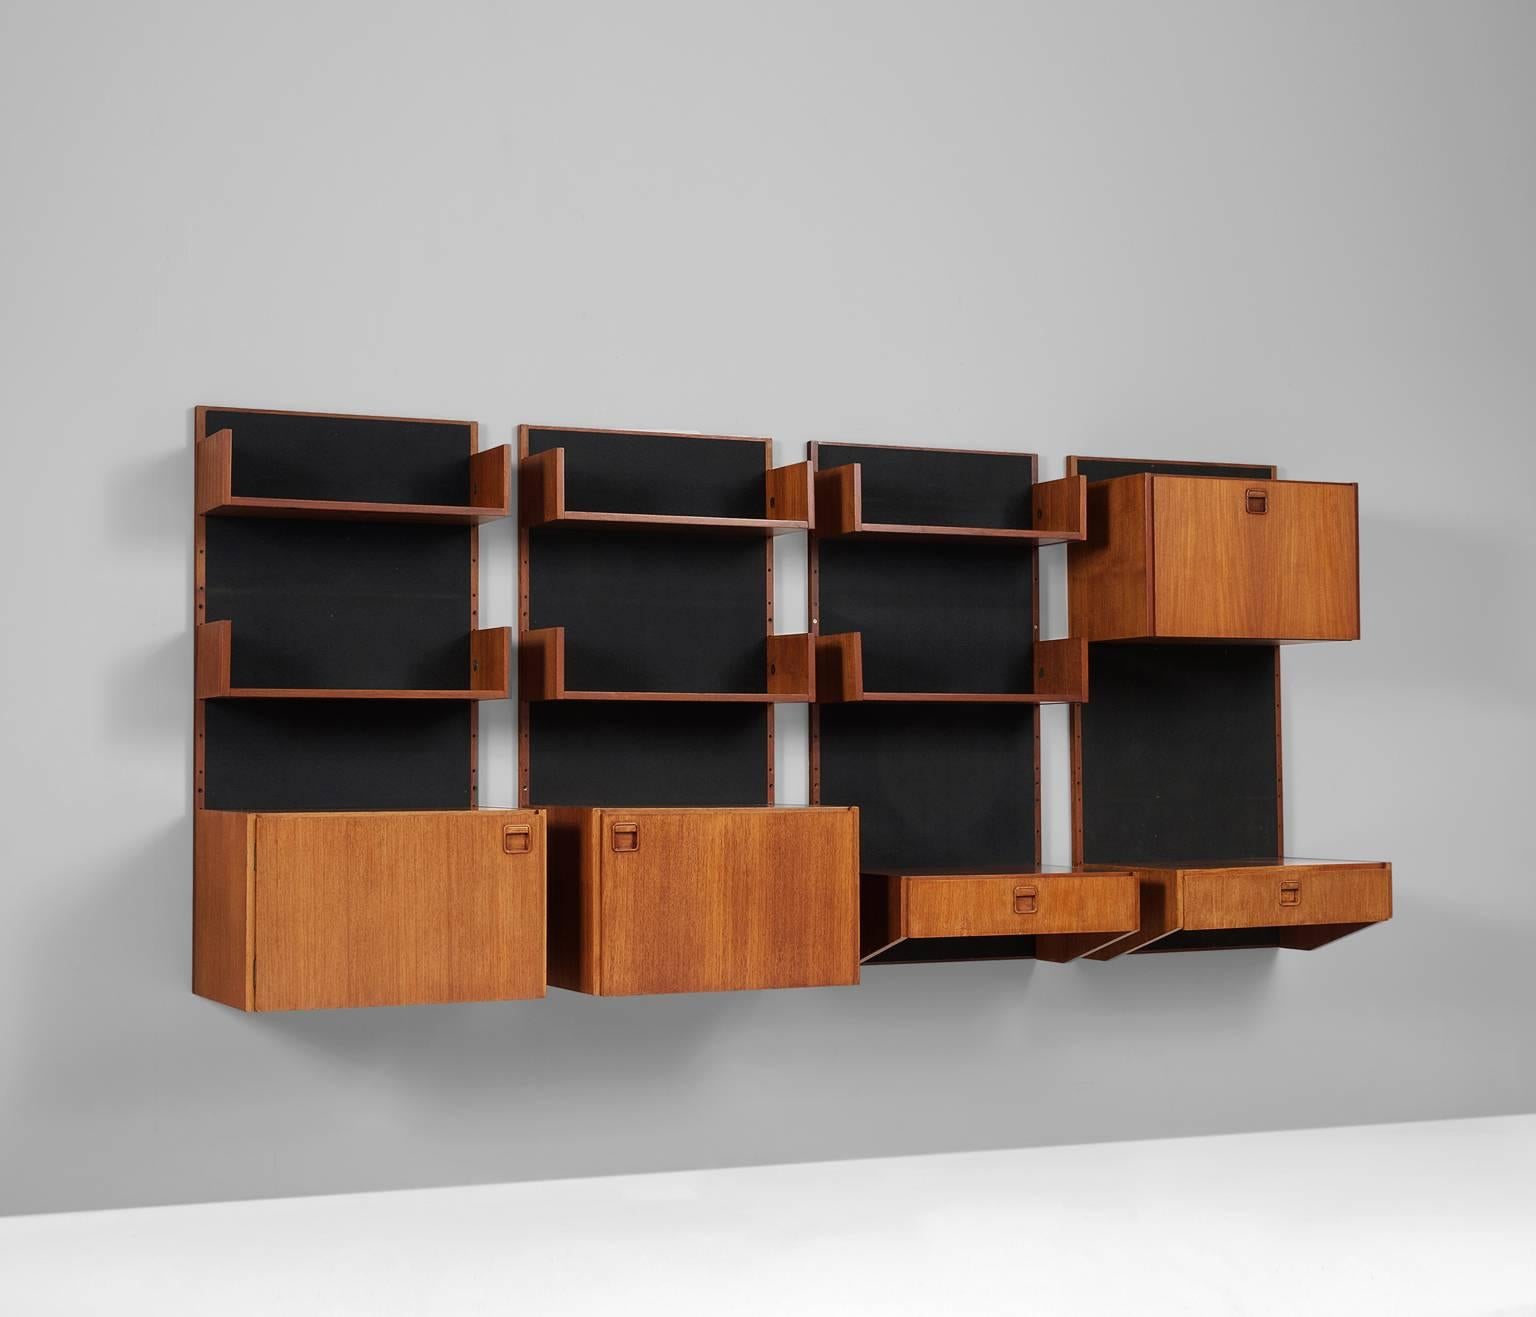 Wall Console in teak, Scandinavia 1950s.

Sophisticated wall console in teak. The wall module consists of four vertical elements with a black background. Every element is equiped with several shelves, cabinets or drawers.

The combination of